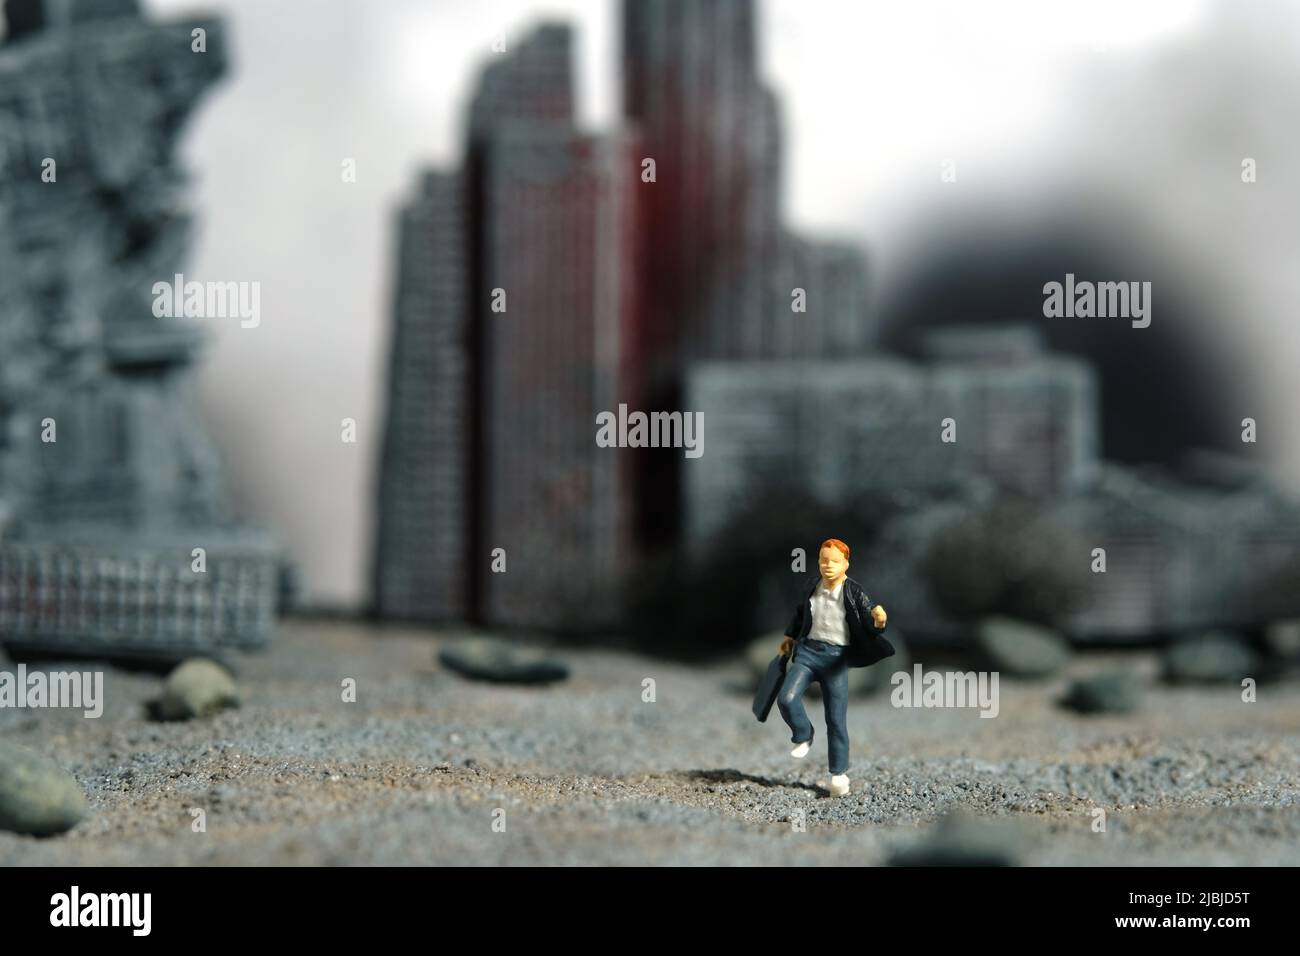 Miniature people toy figure photography. School education for students in conflict areas concept. Young men pupil running on ruined city diorama backg Stock Photo